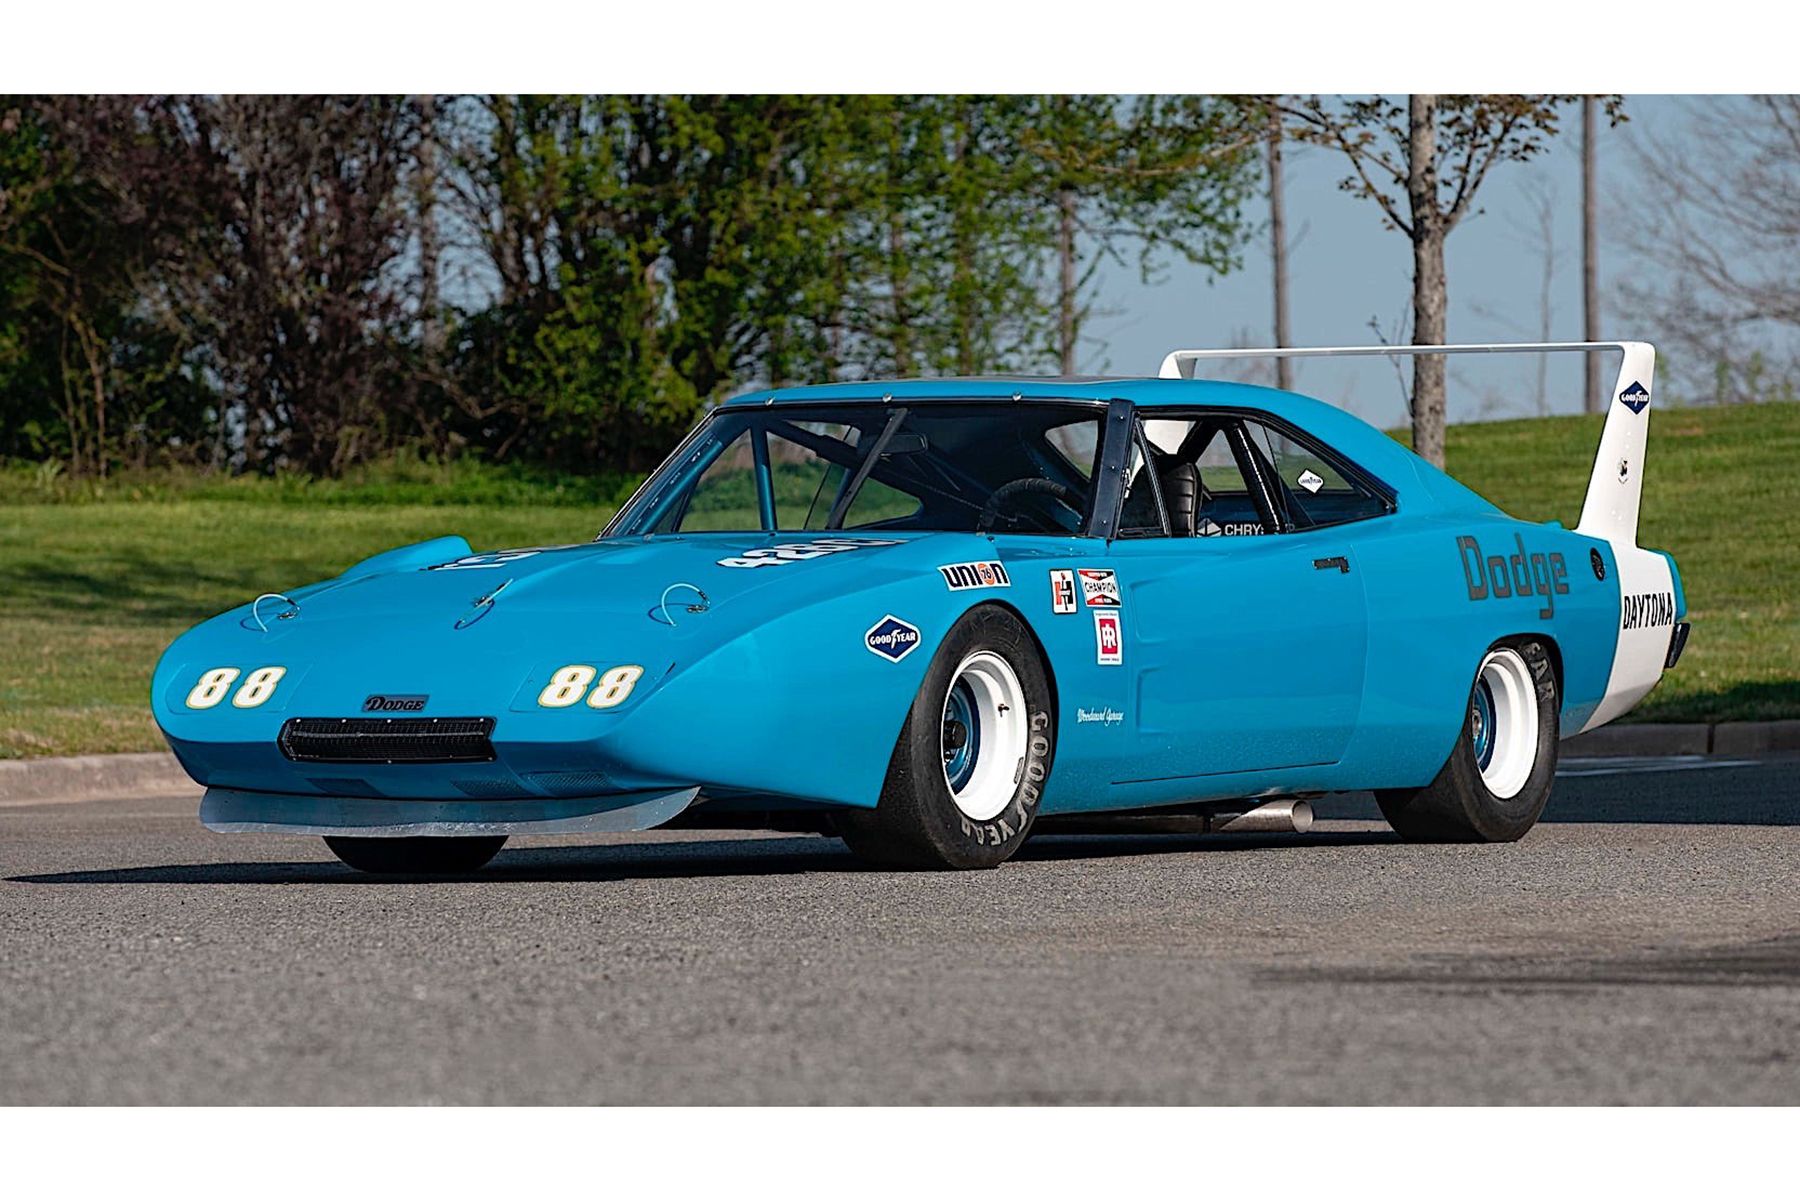 Buy It! The first Dodge Charger Daytona to hit 200 mph is being auctioned  off | Driving